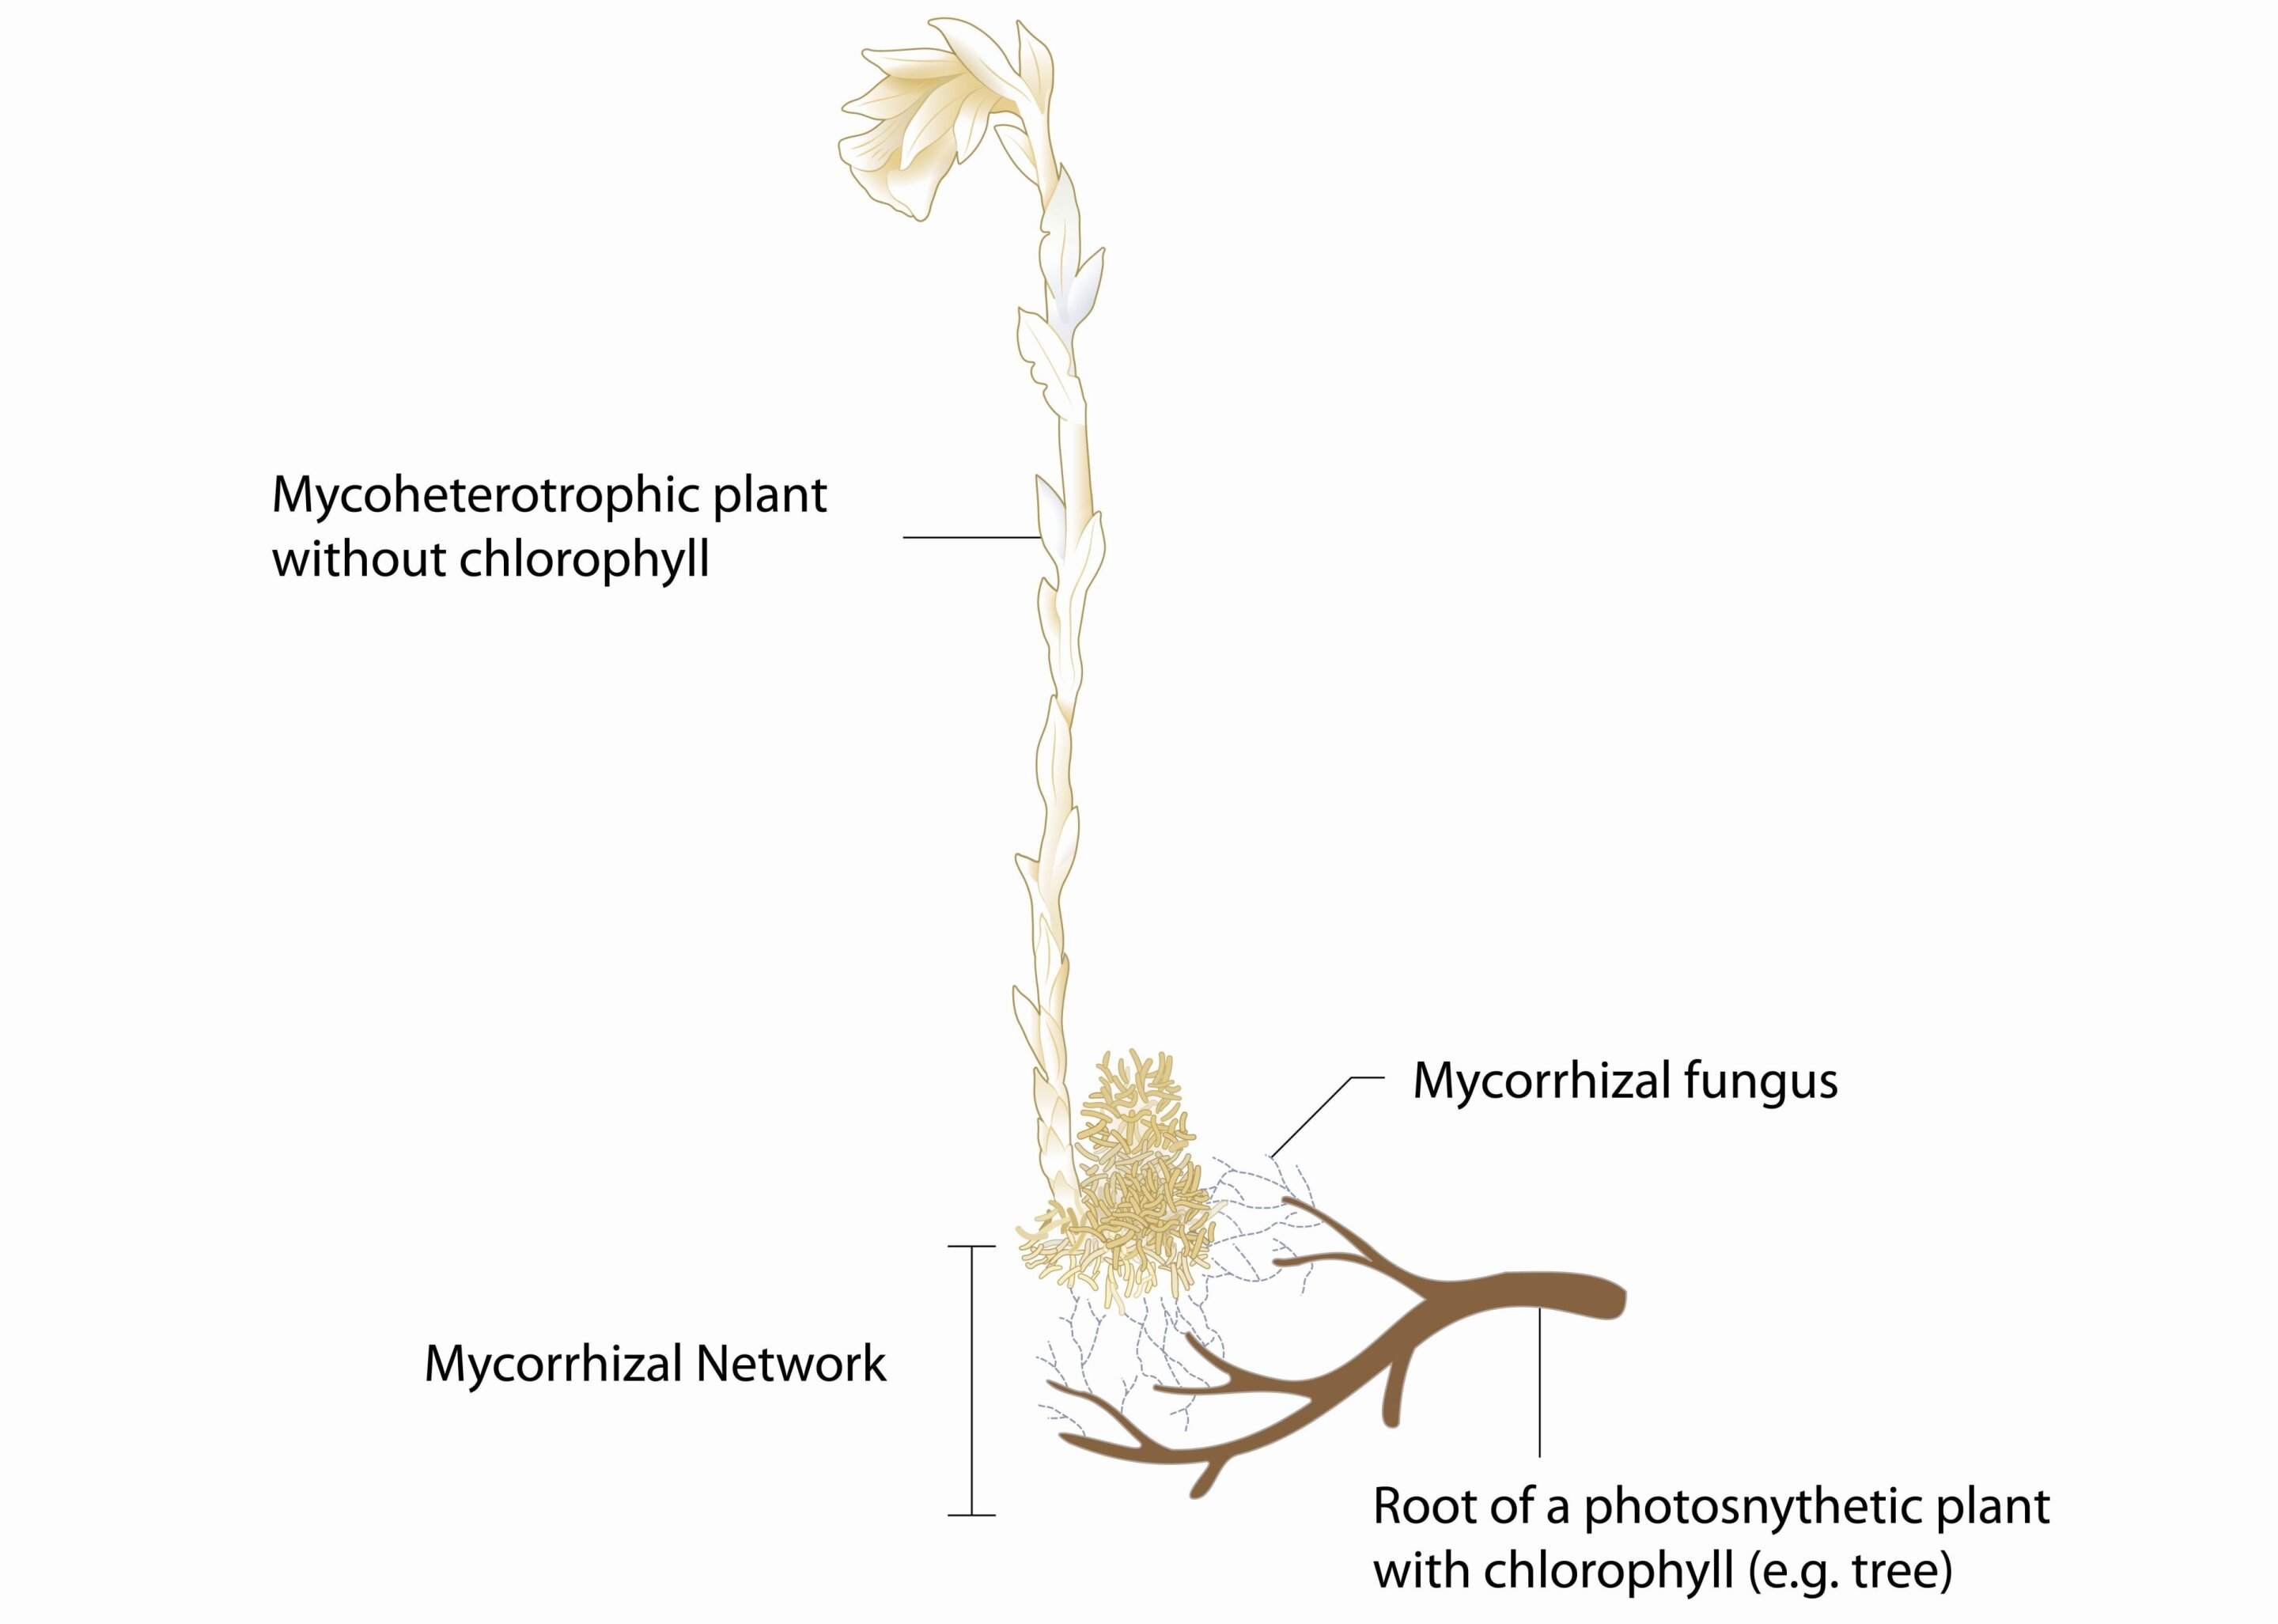 photo of Mycoheterotrophic plants as a key to the 'Wood Wide Web' image